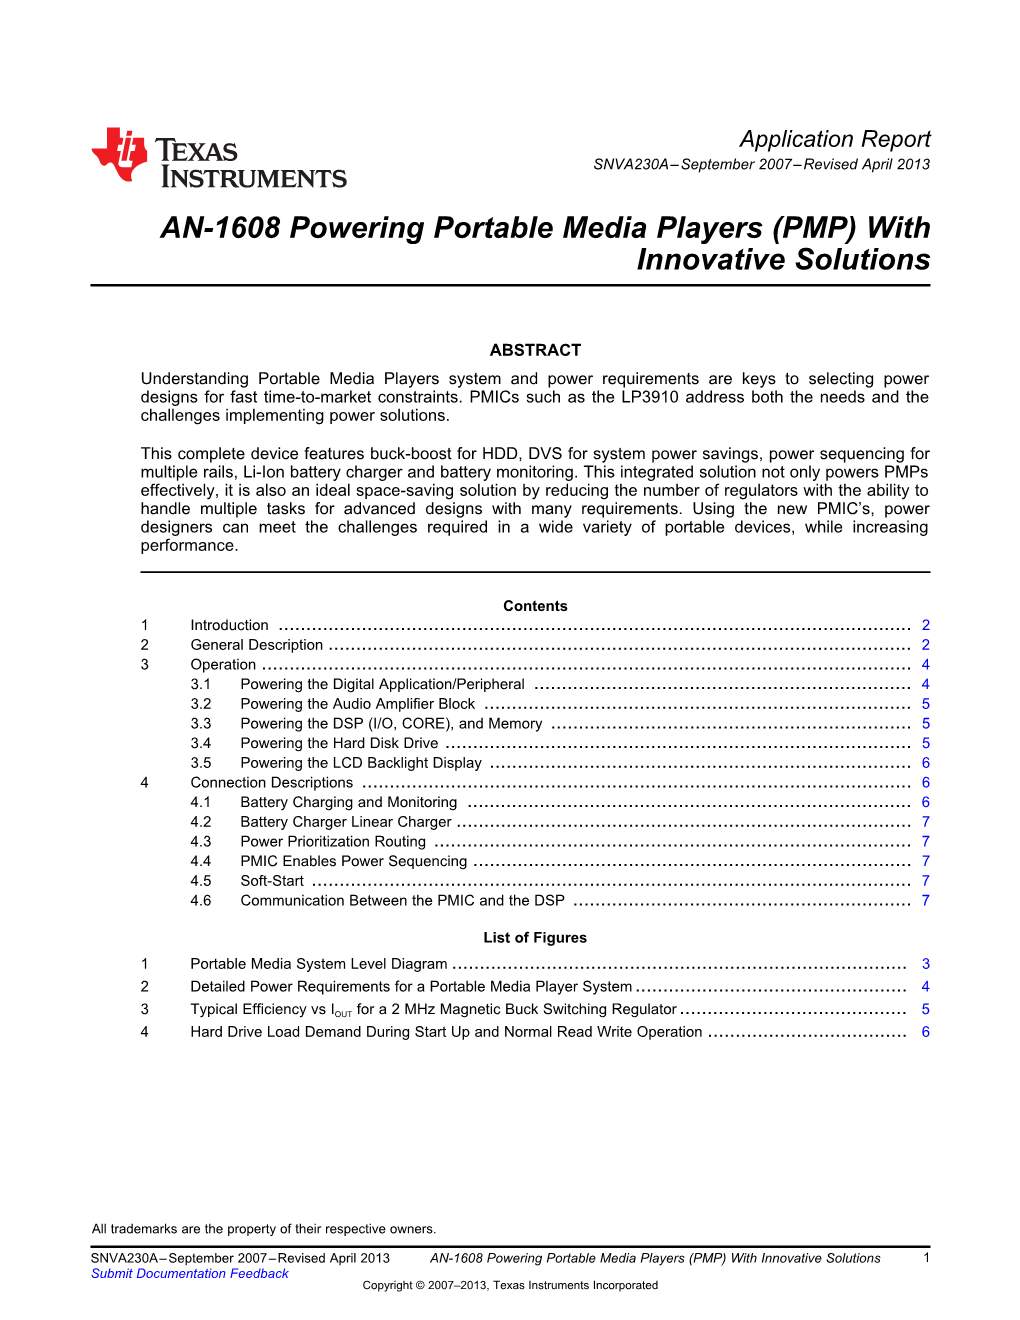 Powering Portable Media Players (PMP) with Innovative Solutions